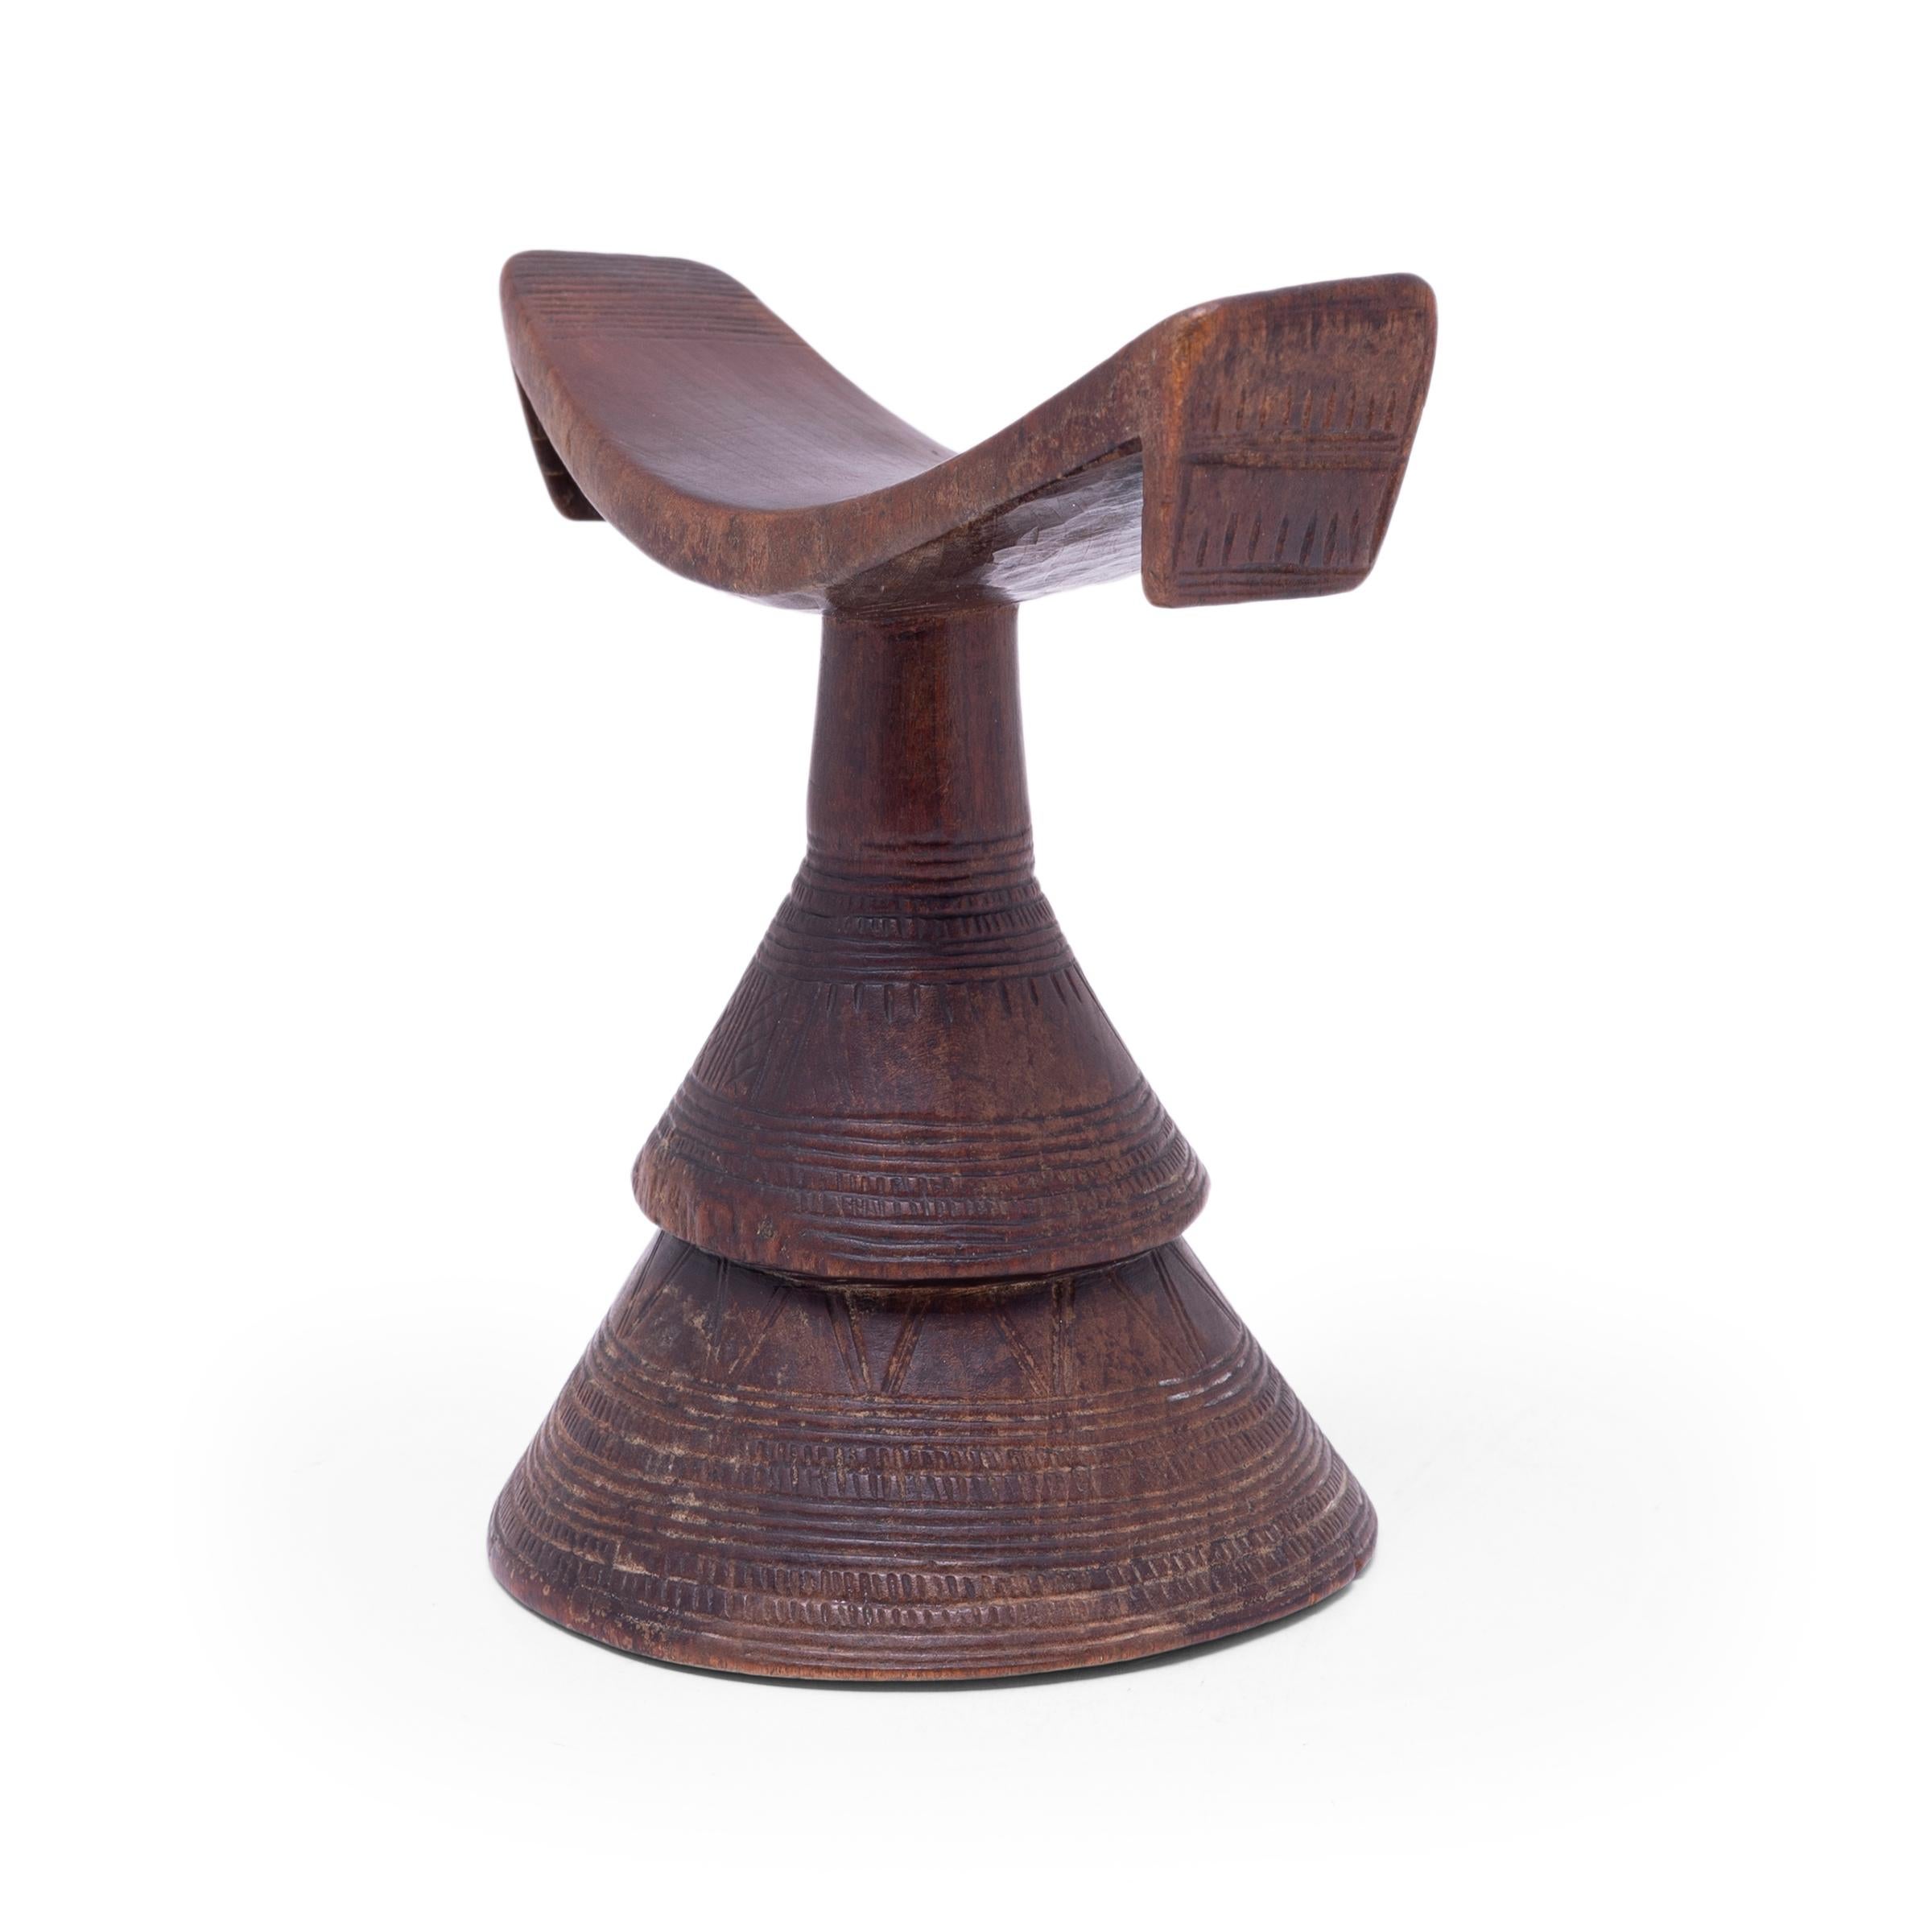 So as not to muss their intricate hairstyles while sleeping, Ethiopian women would traditionally rest their heads on these petite wooden stands. The combination of conic base and concave rest gives this functional item an elevated sense of artistry.